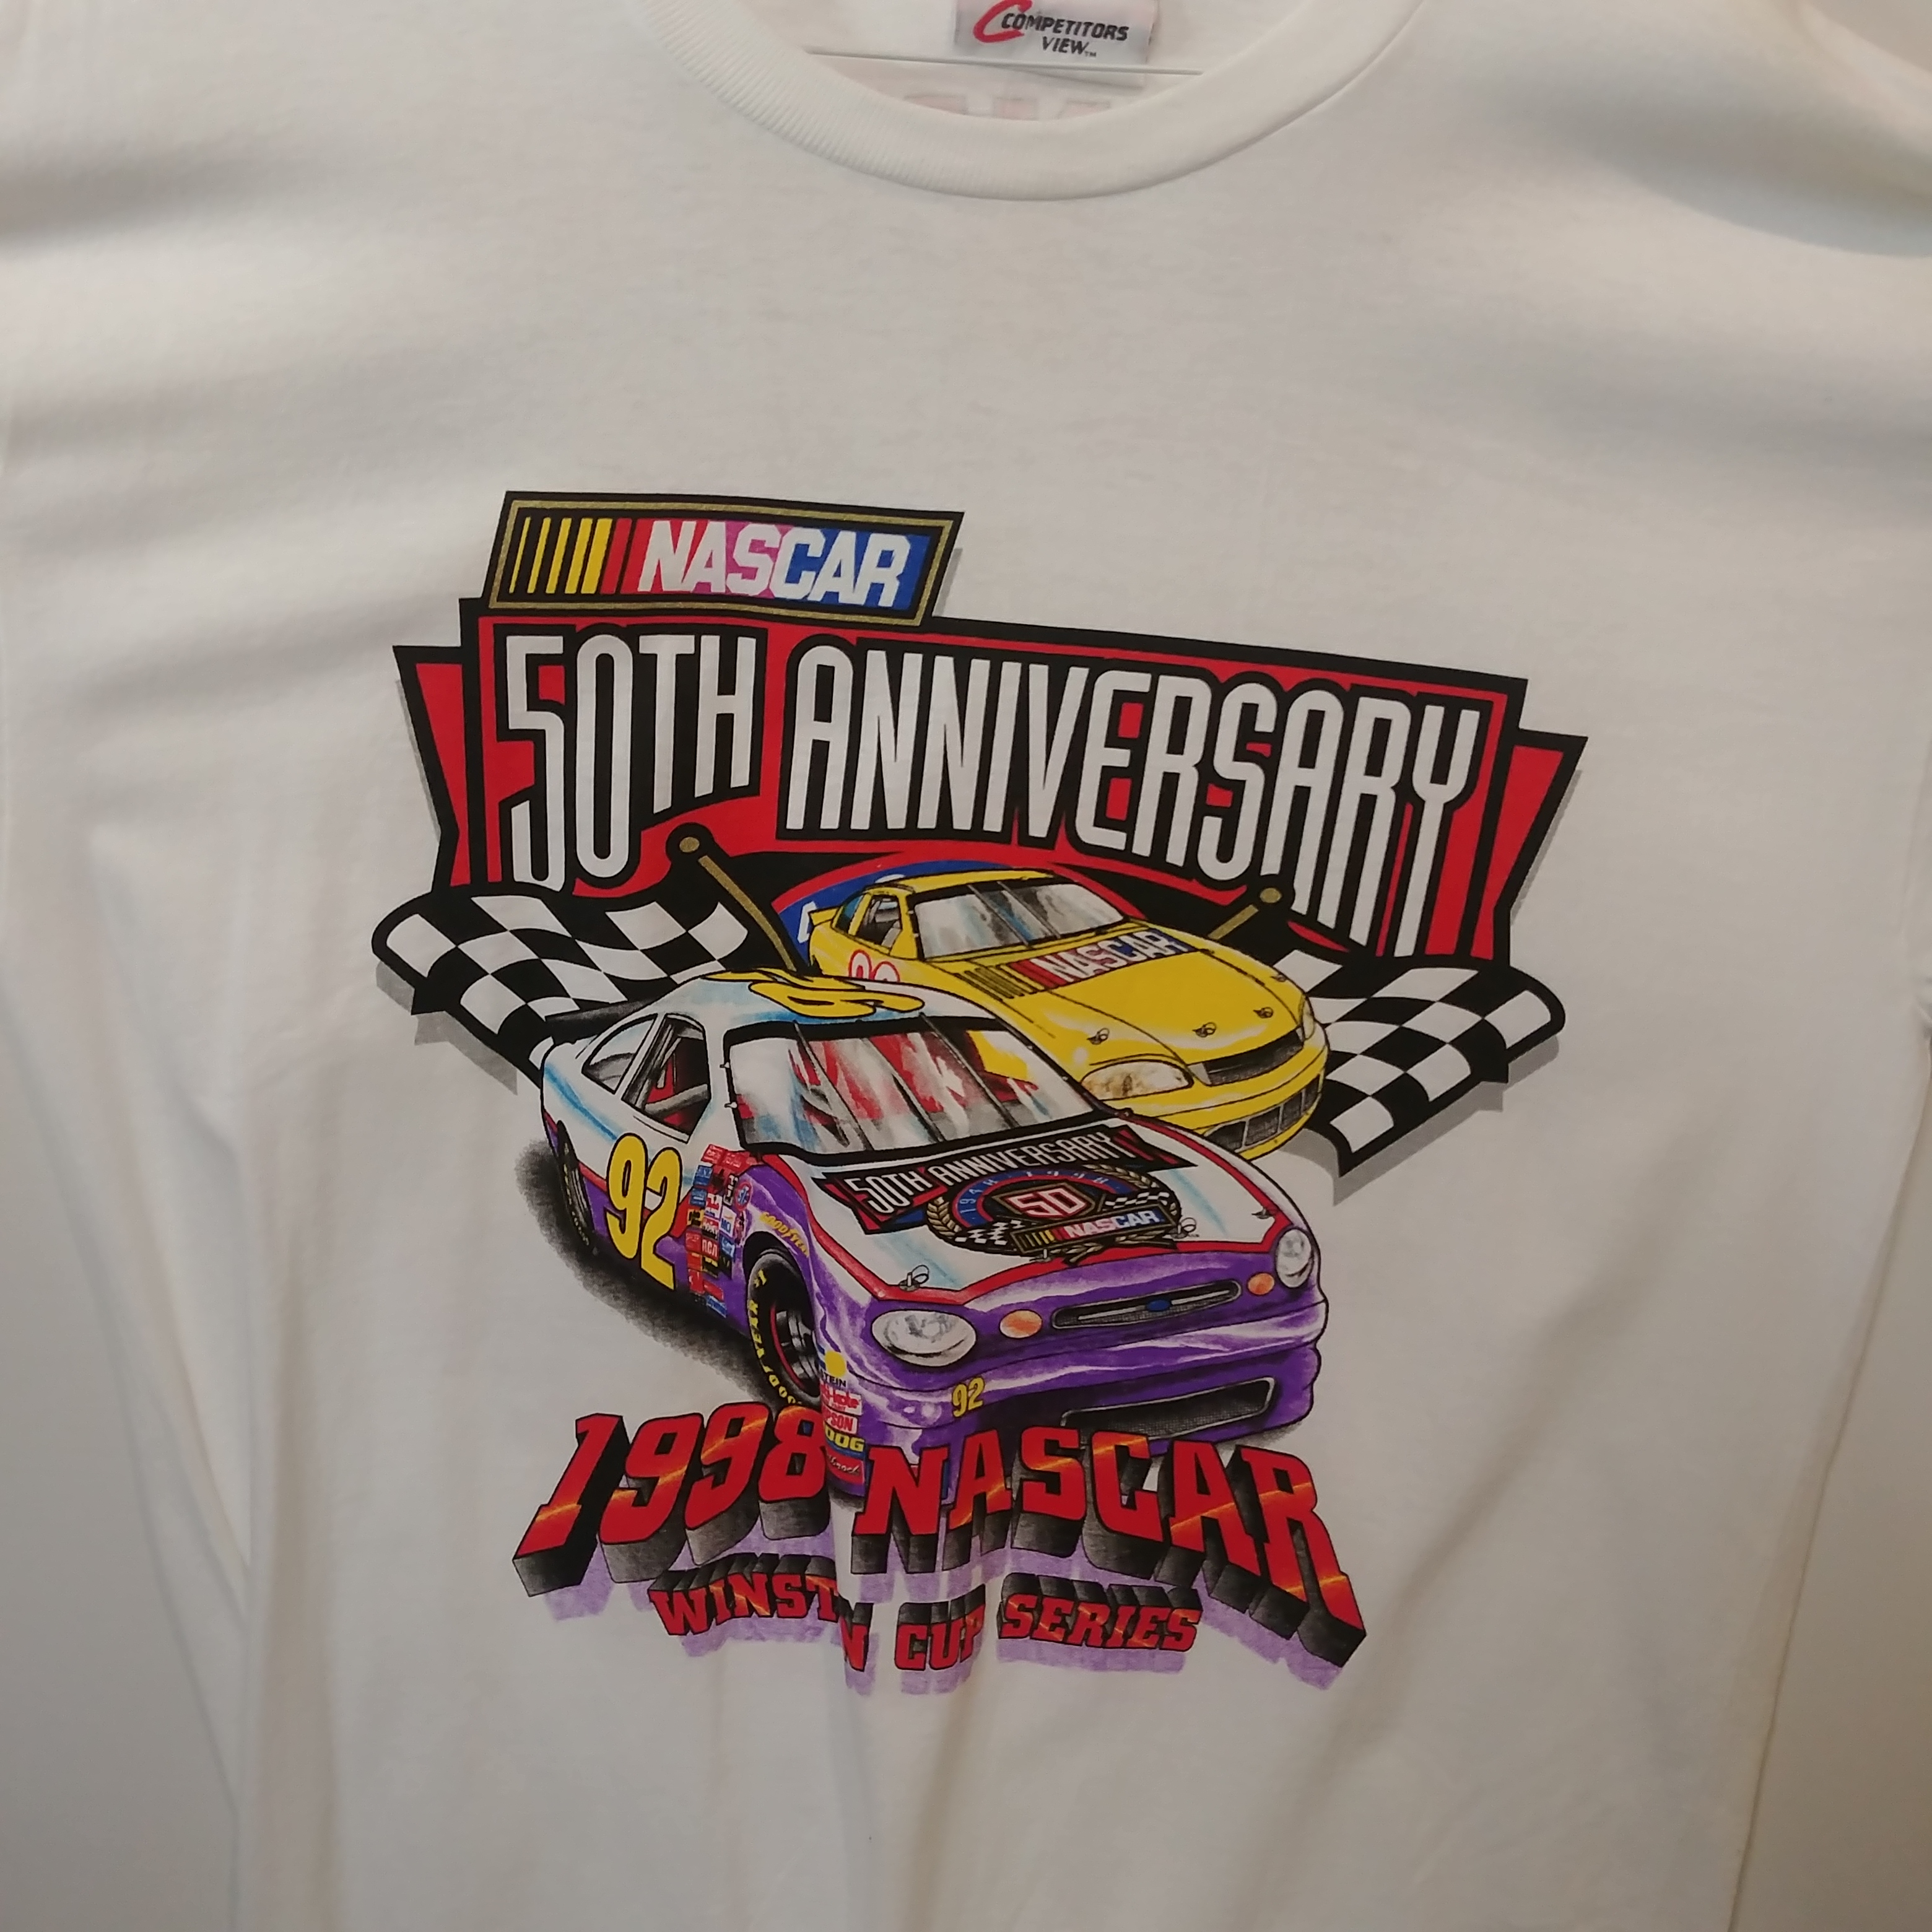 1998 Winston Cup Nascar "50th Anniversary" Schedule tee